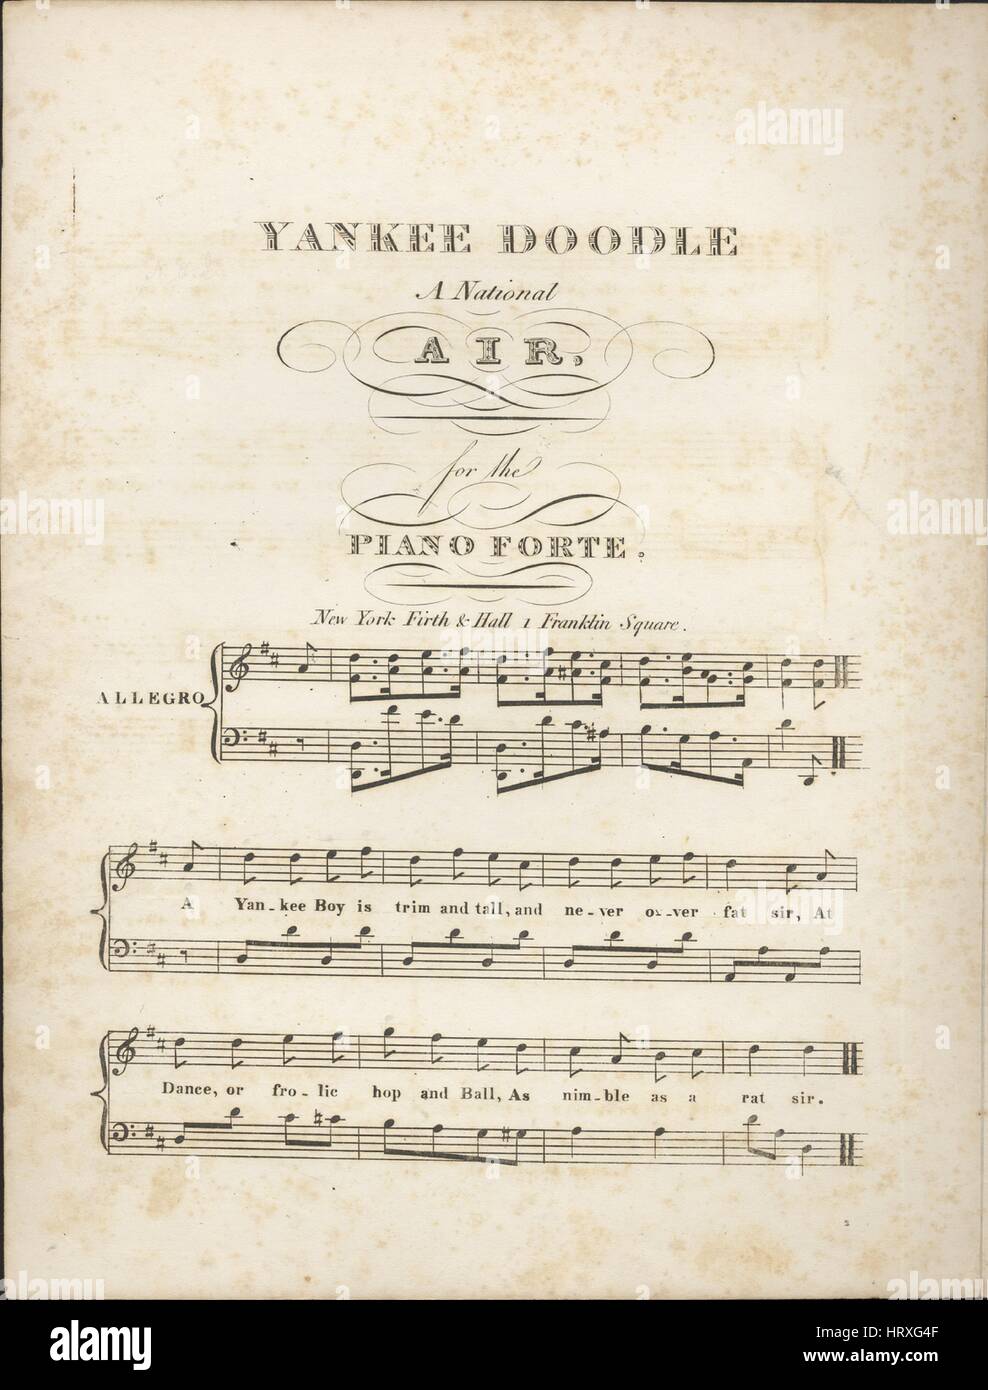 Sheet Music Cover Image Of The Song Yankee Doodle A National Air Stock Photo Alamy